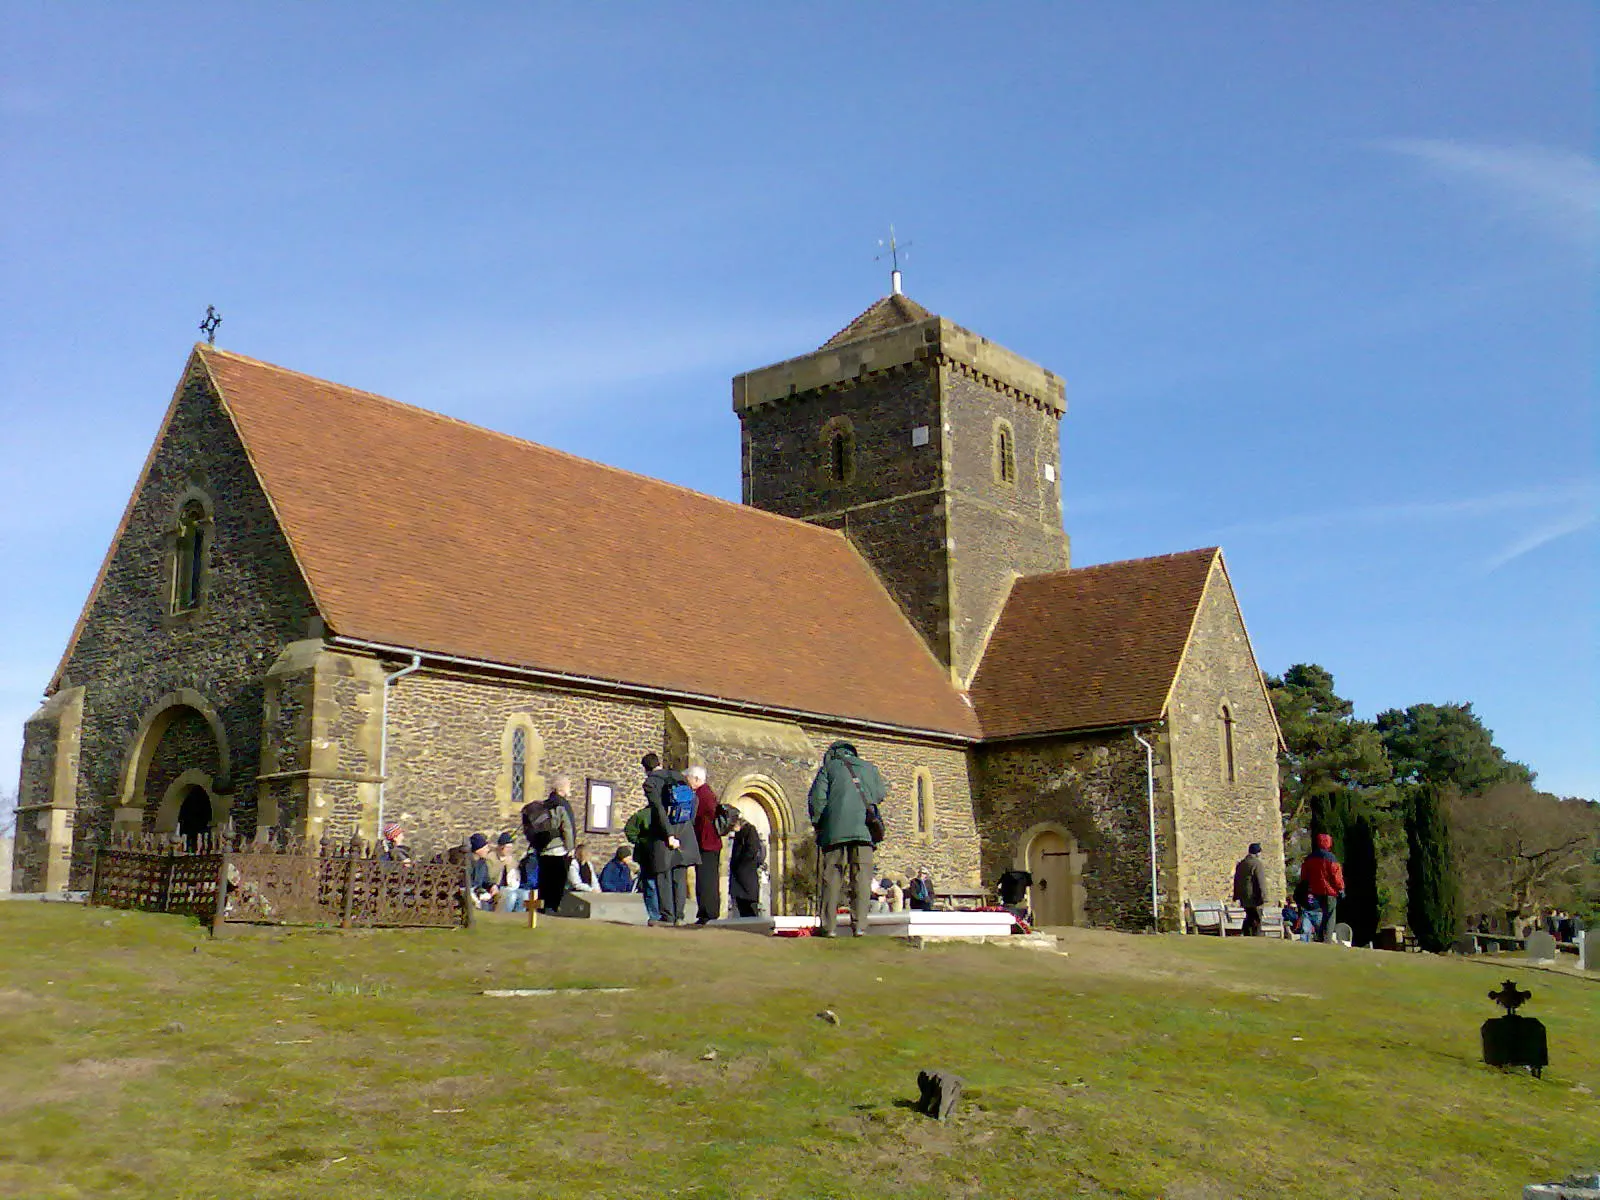 Photo showing: The church of St Martha-on-the-Hill in Surrey, England.  The church is dated to the 12th century and is dedicated to Saint Martha (sister of Mary & Lazarus.)